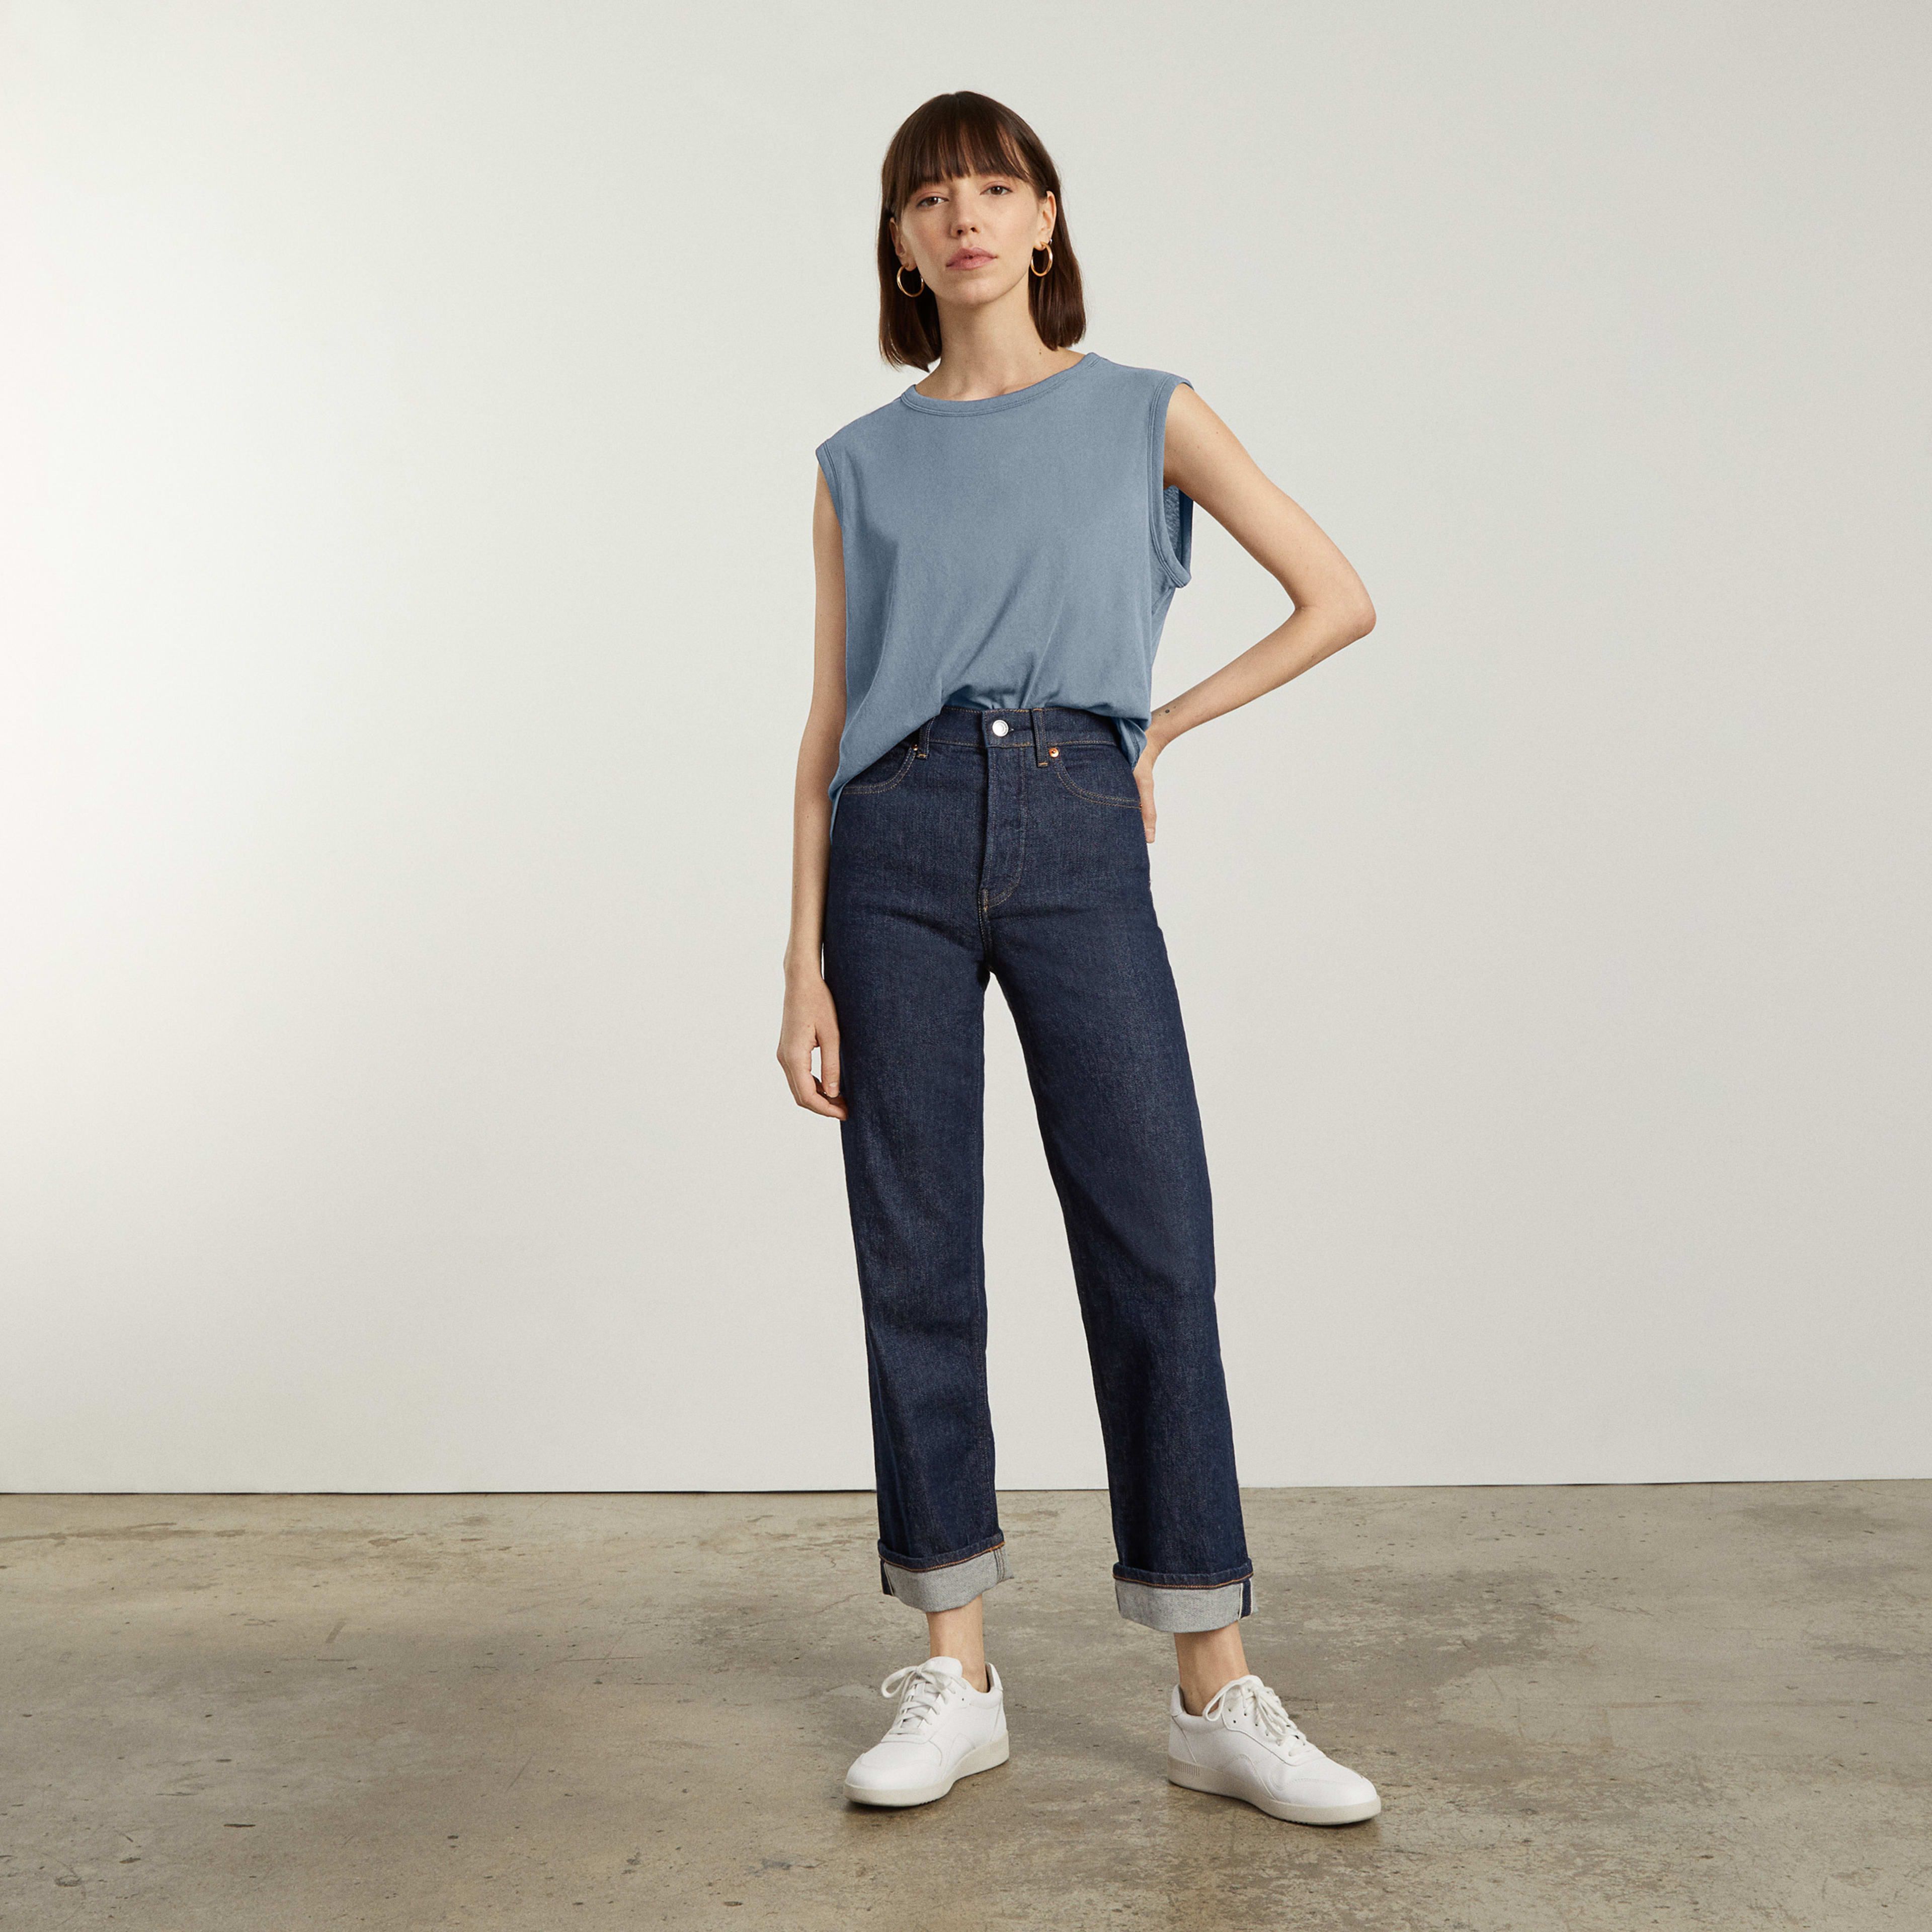 The Air Muscle Tank | Everlane